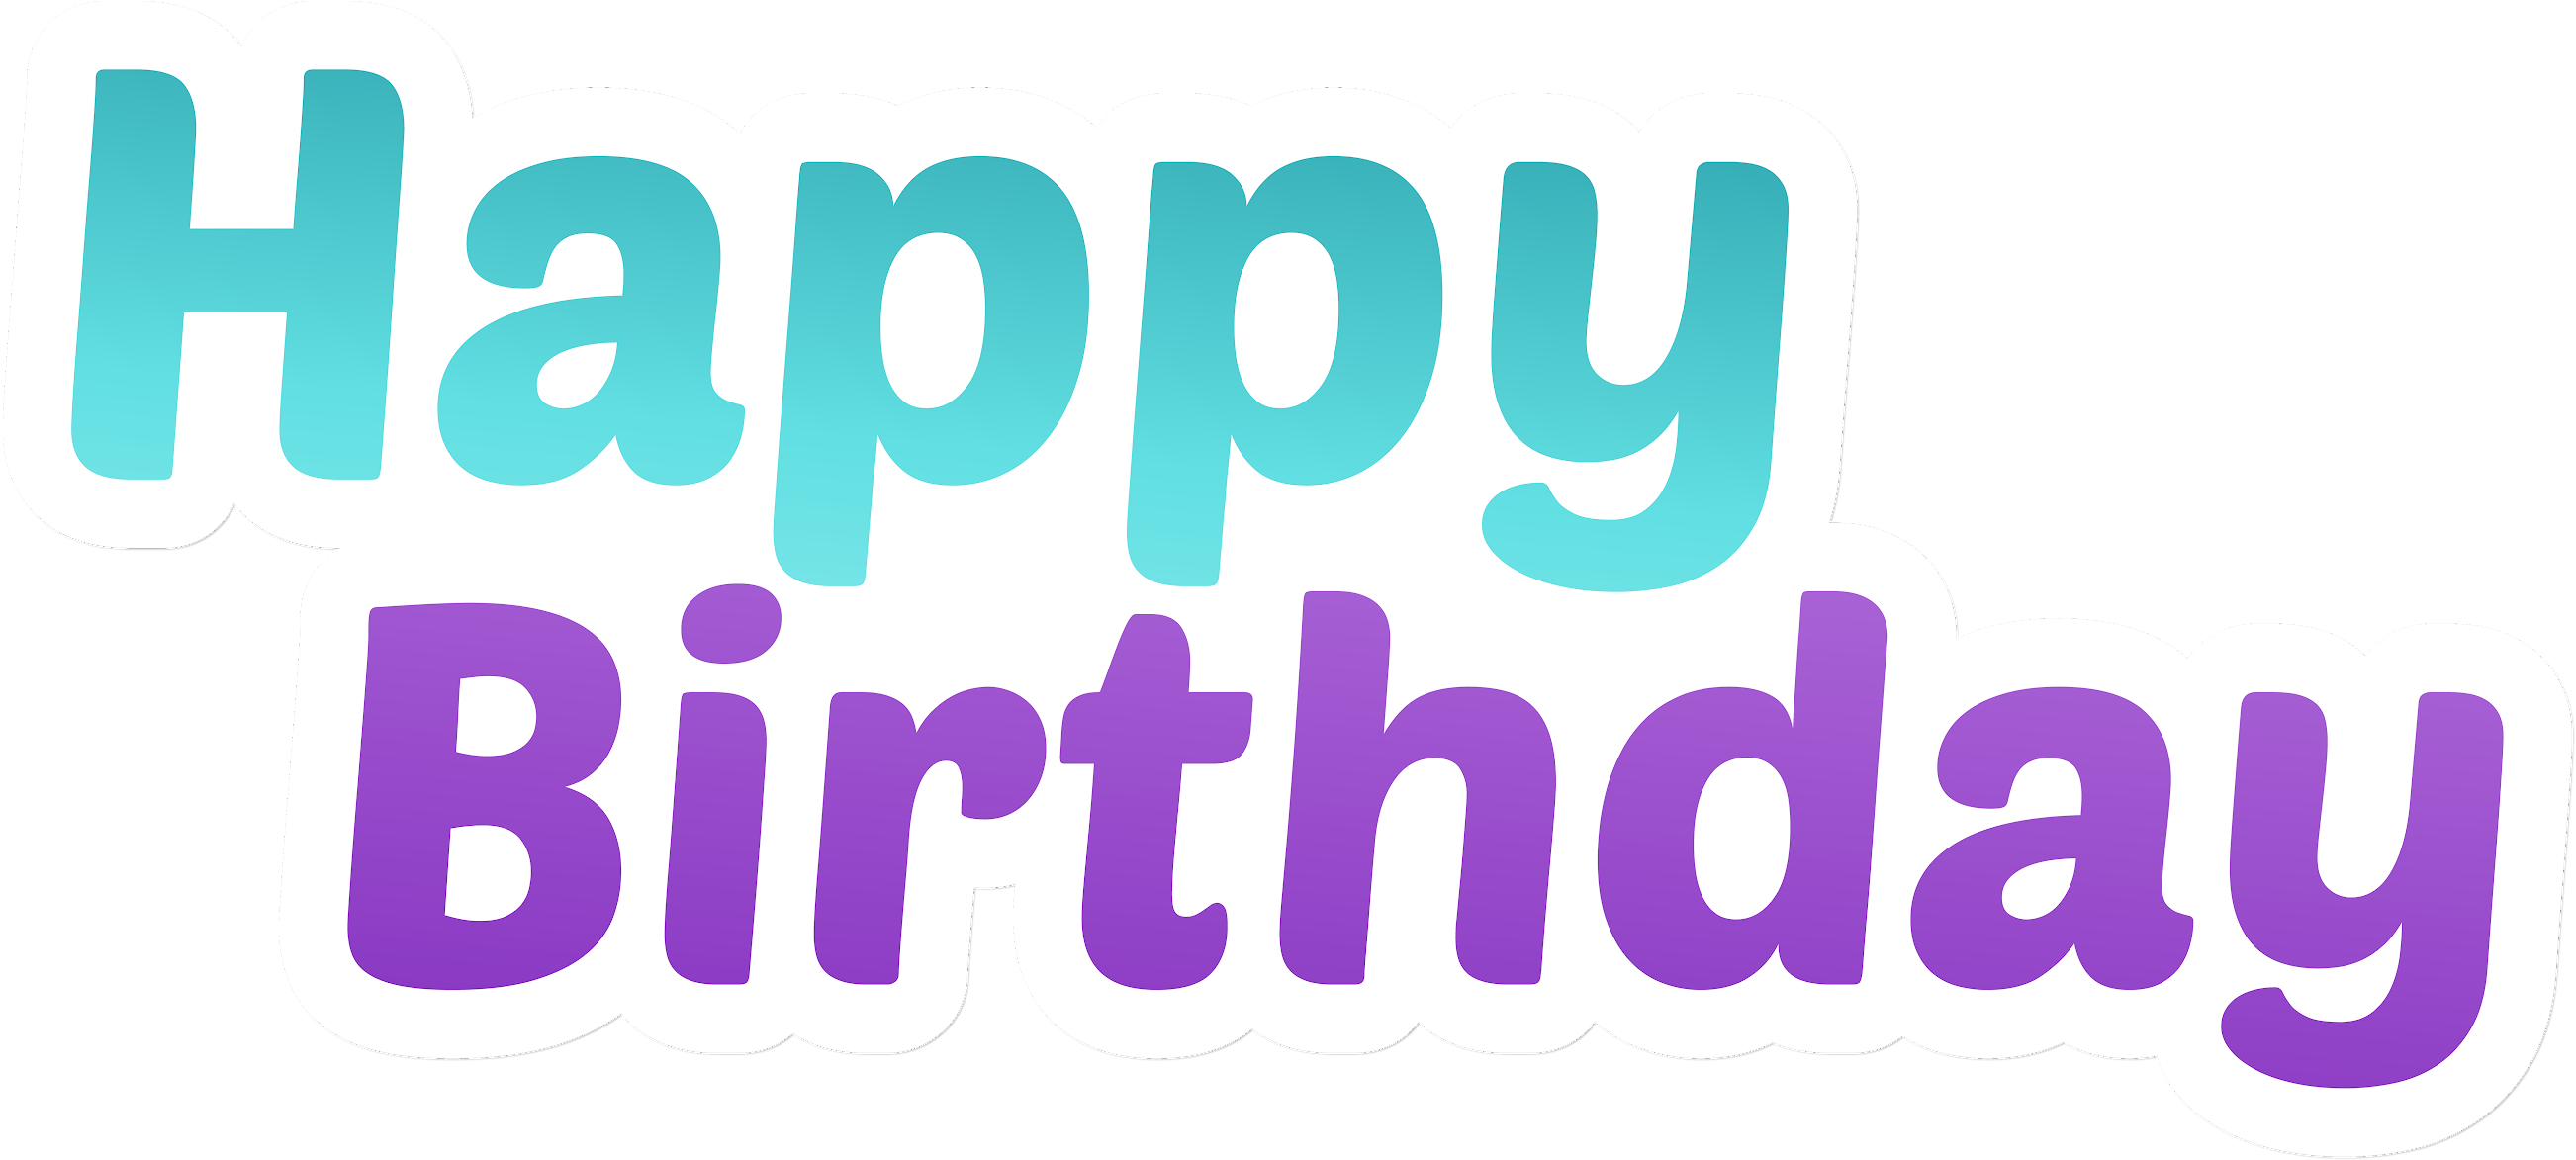 Pin Pngsector On Happy Birthday Transparent Image Clipart - Happy Birthday Teal And Purple (2639x1191)